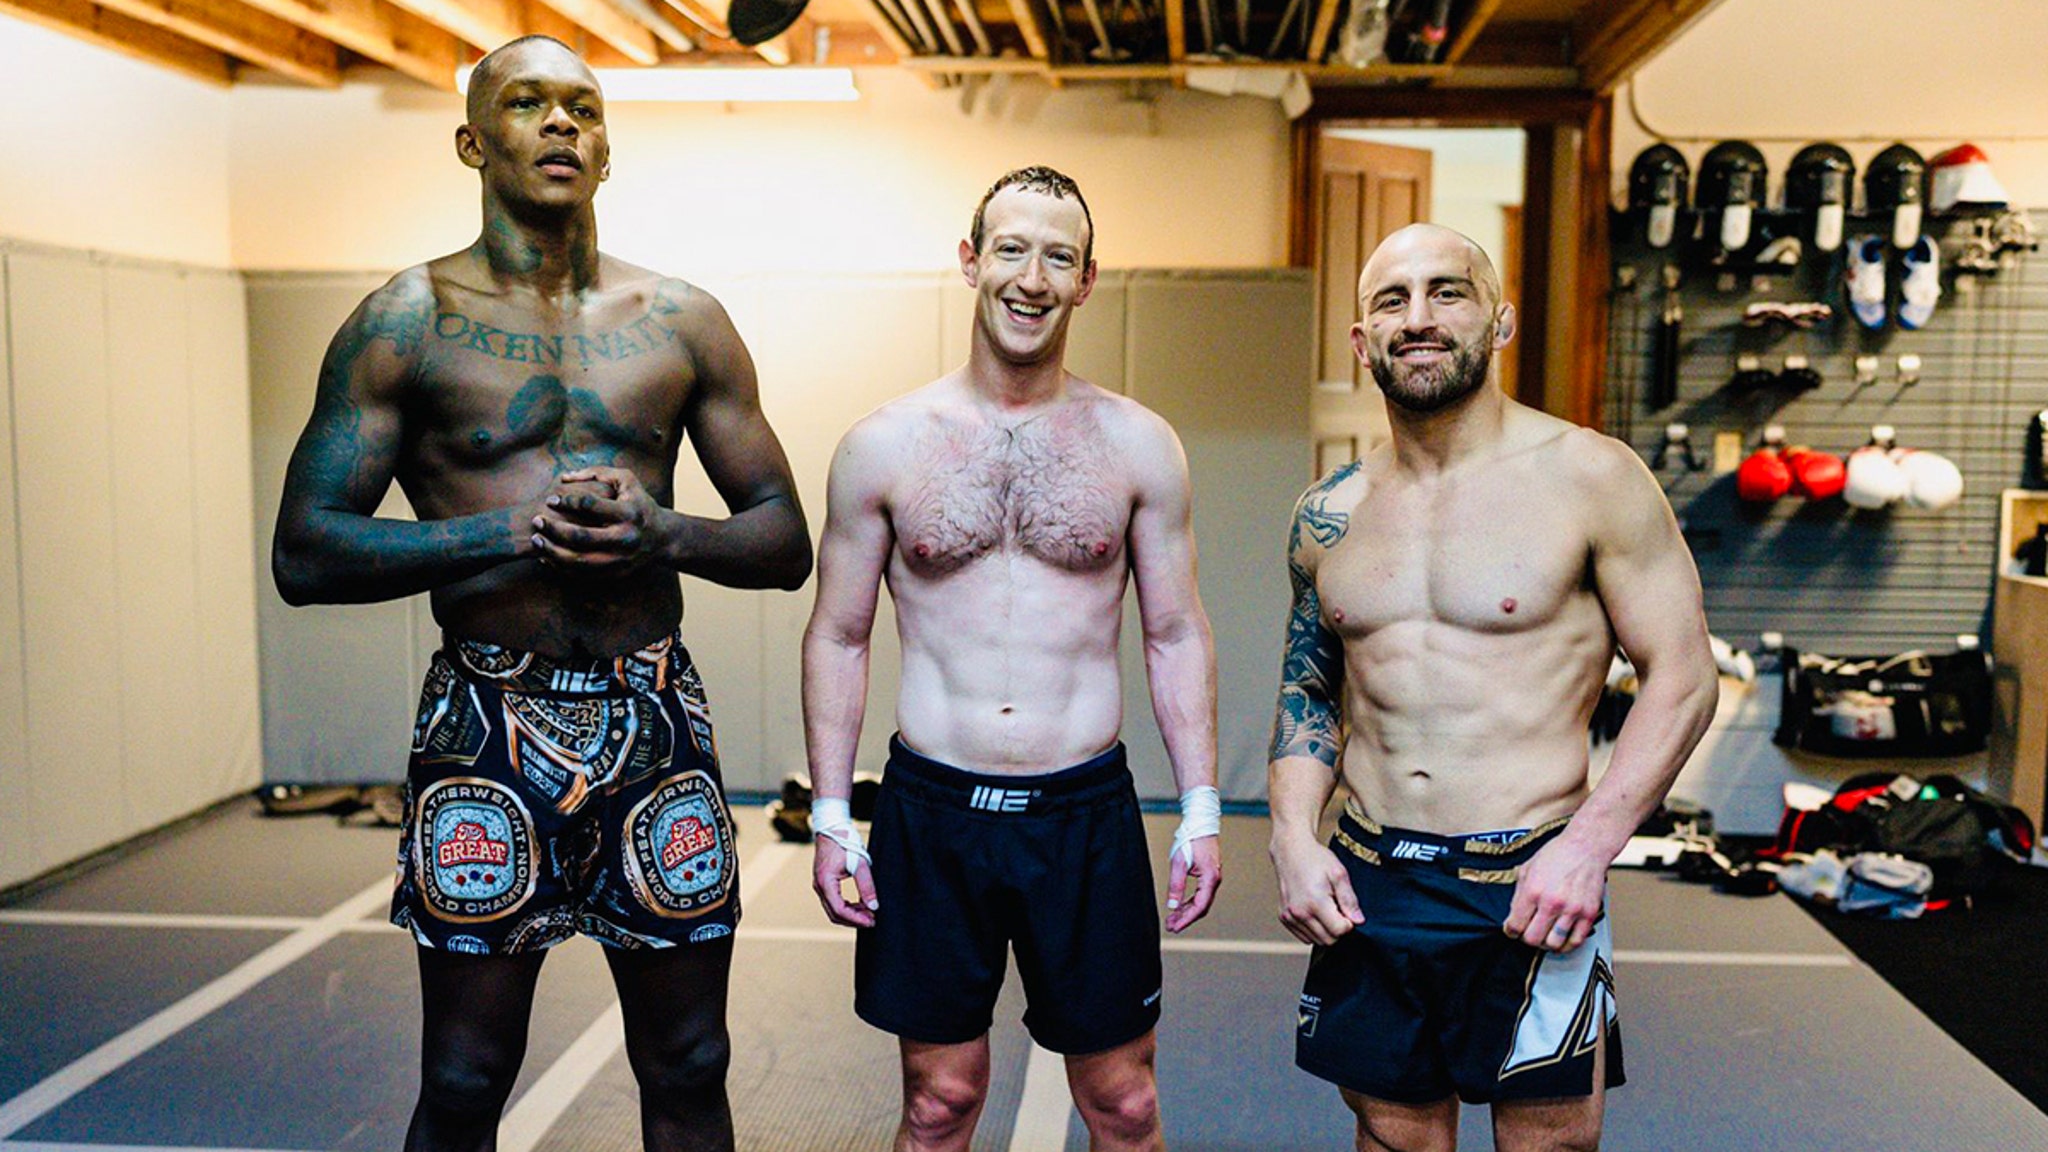 Mark Zuckerberg shows off his shredded body in training session with UFC stars